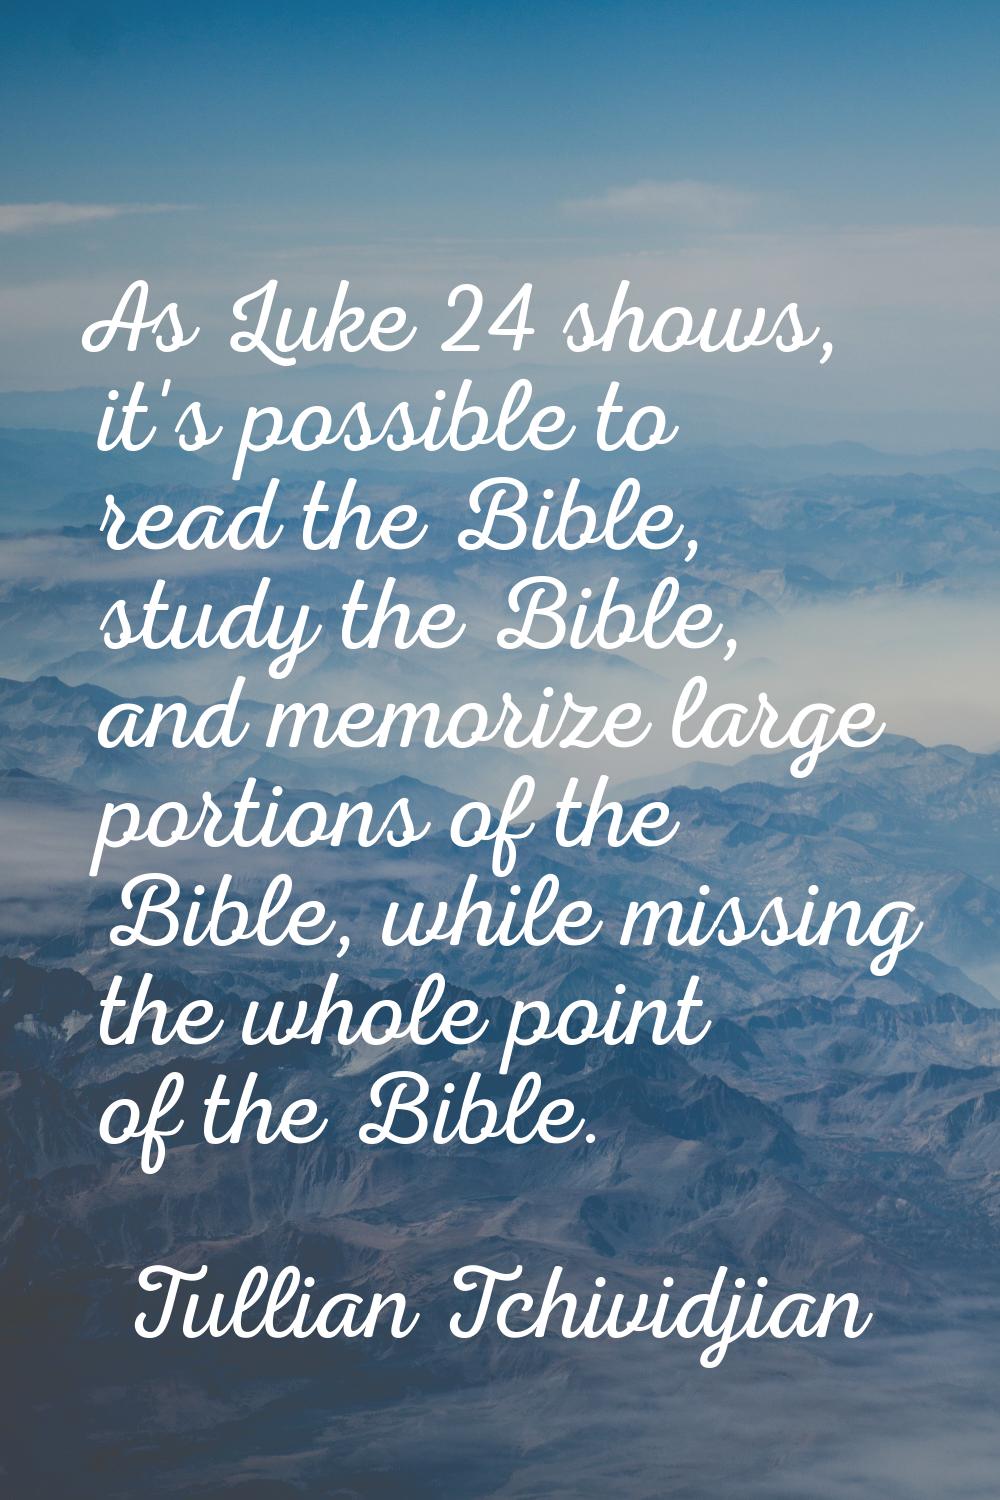 As Luke 24 shows, it's possible to read the Bible, study the Bible, and memorize large portions of 